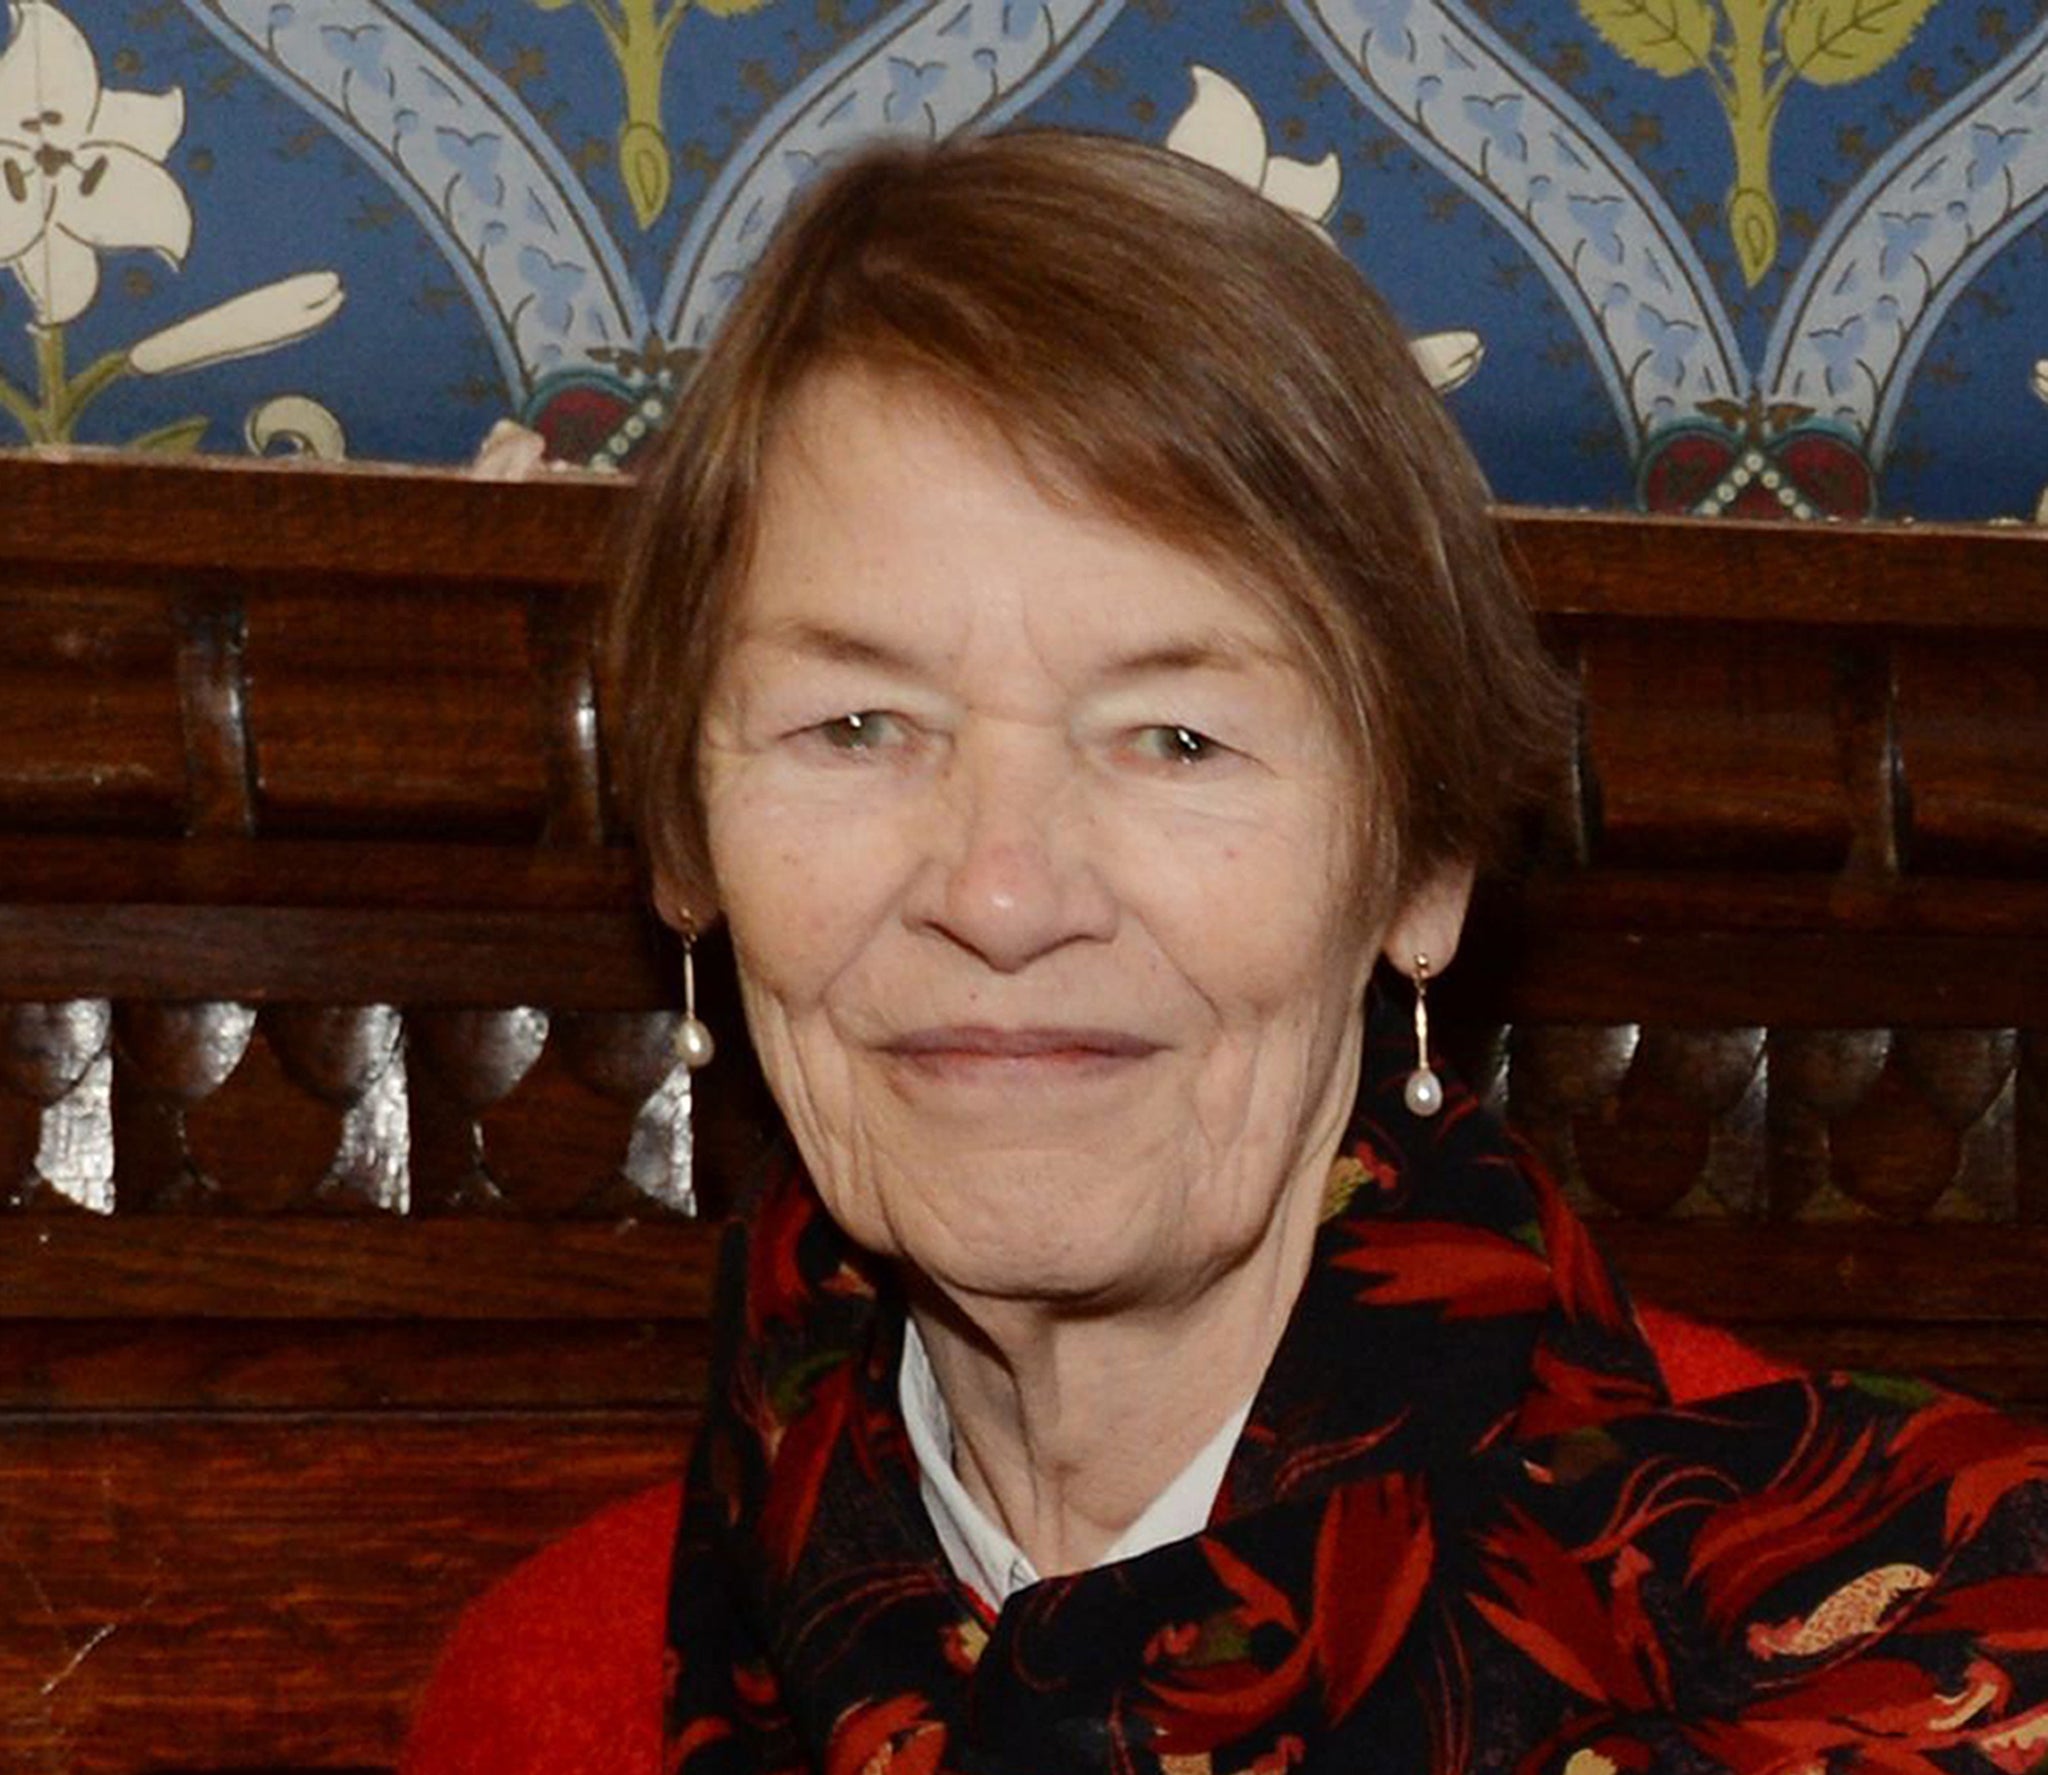 Glenda Jackson will appear in a Radio 4 play after stepping down as a MP for Hampstead and Highgate